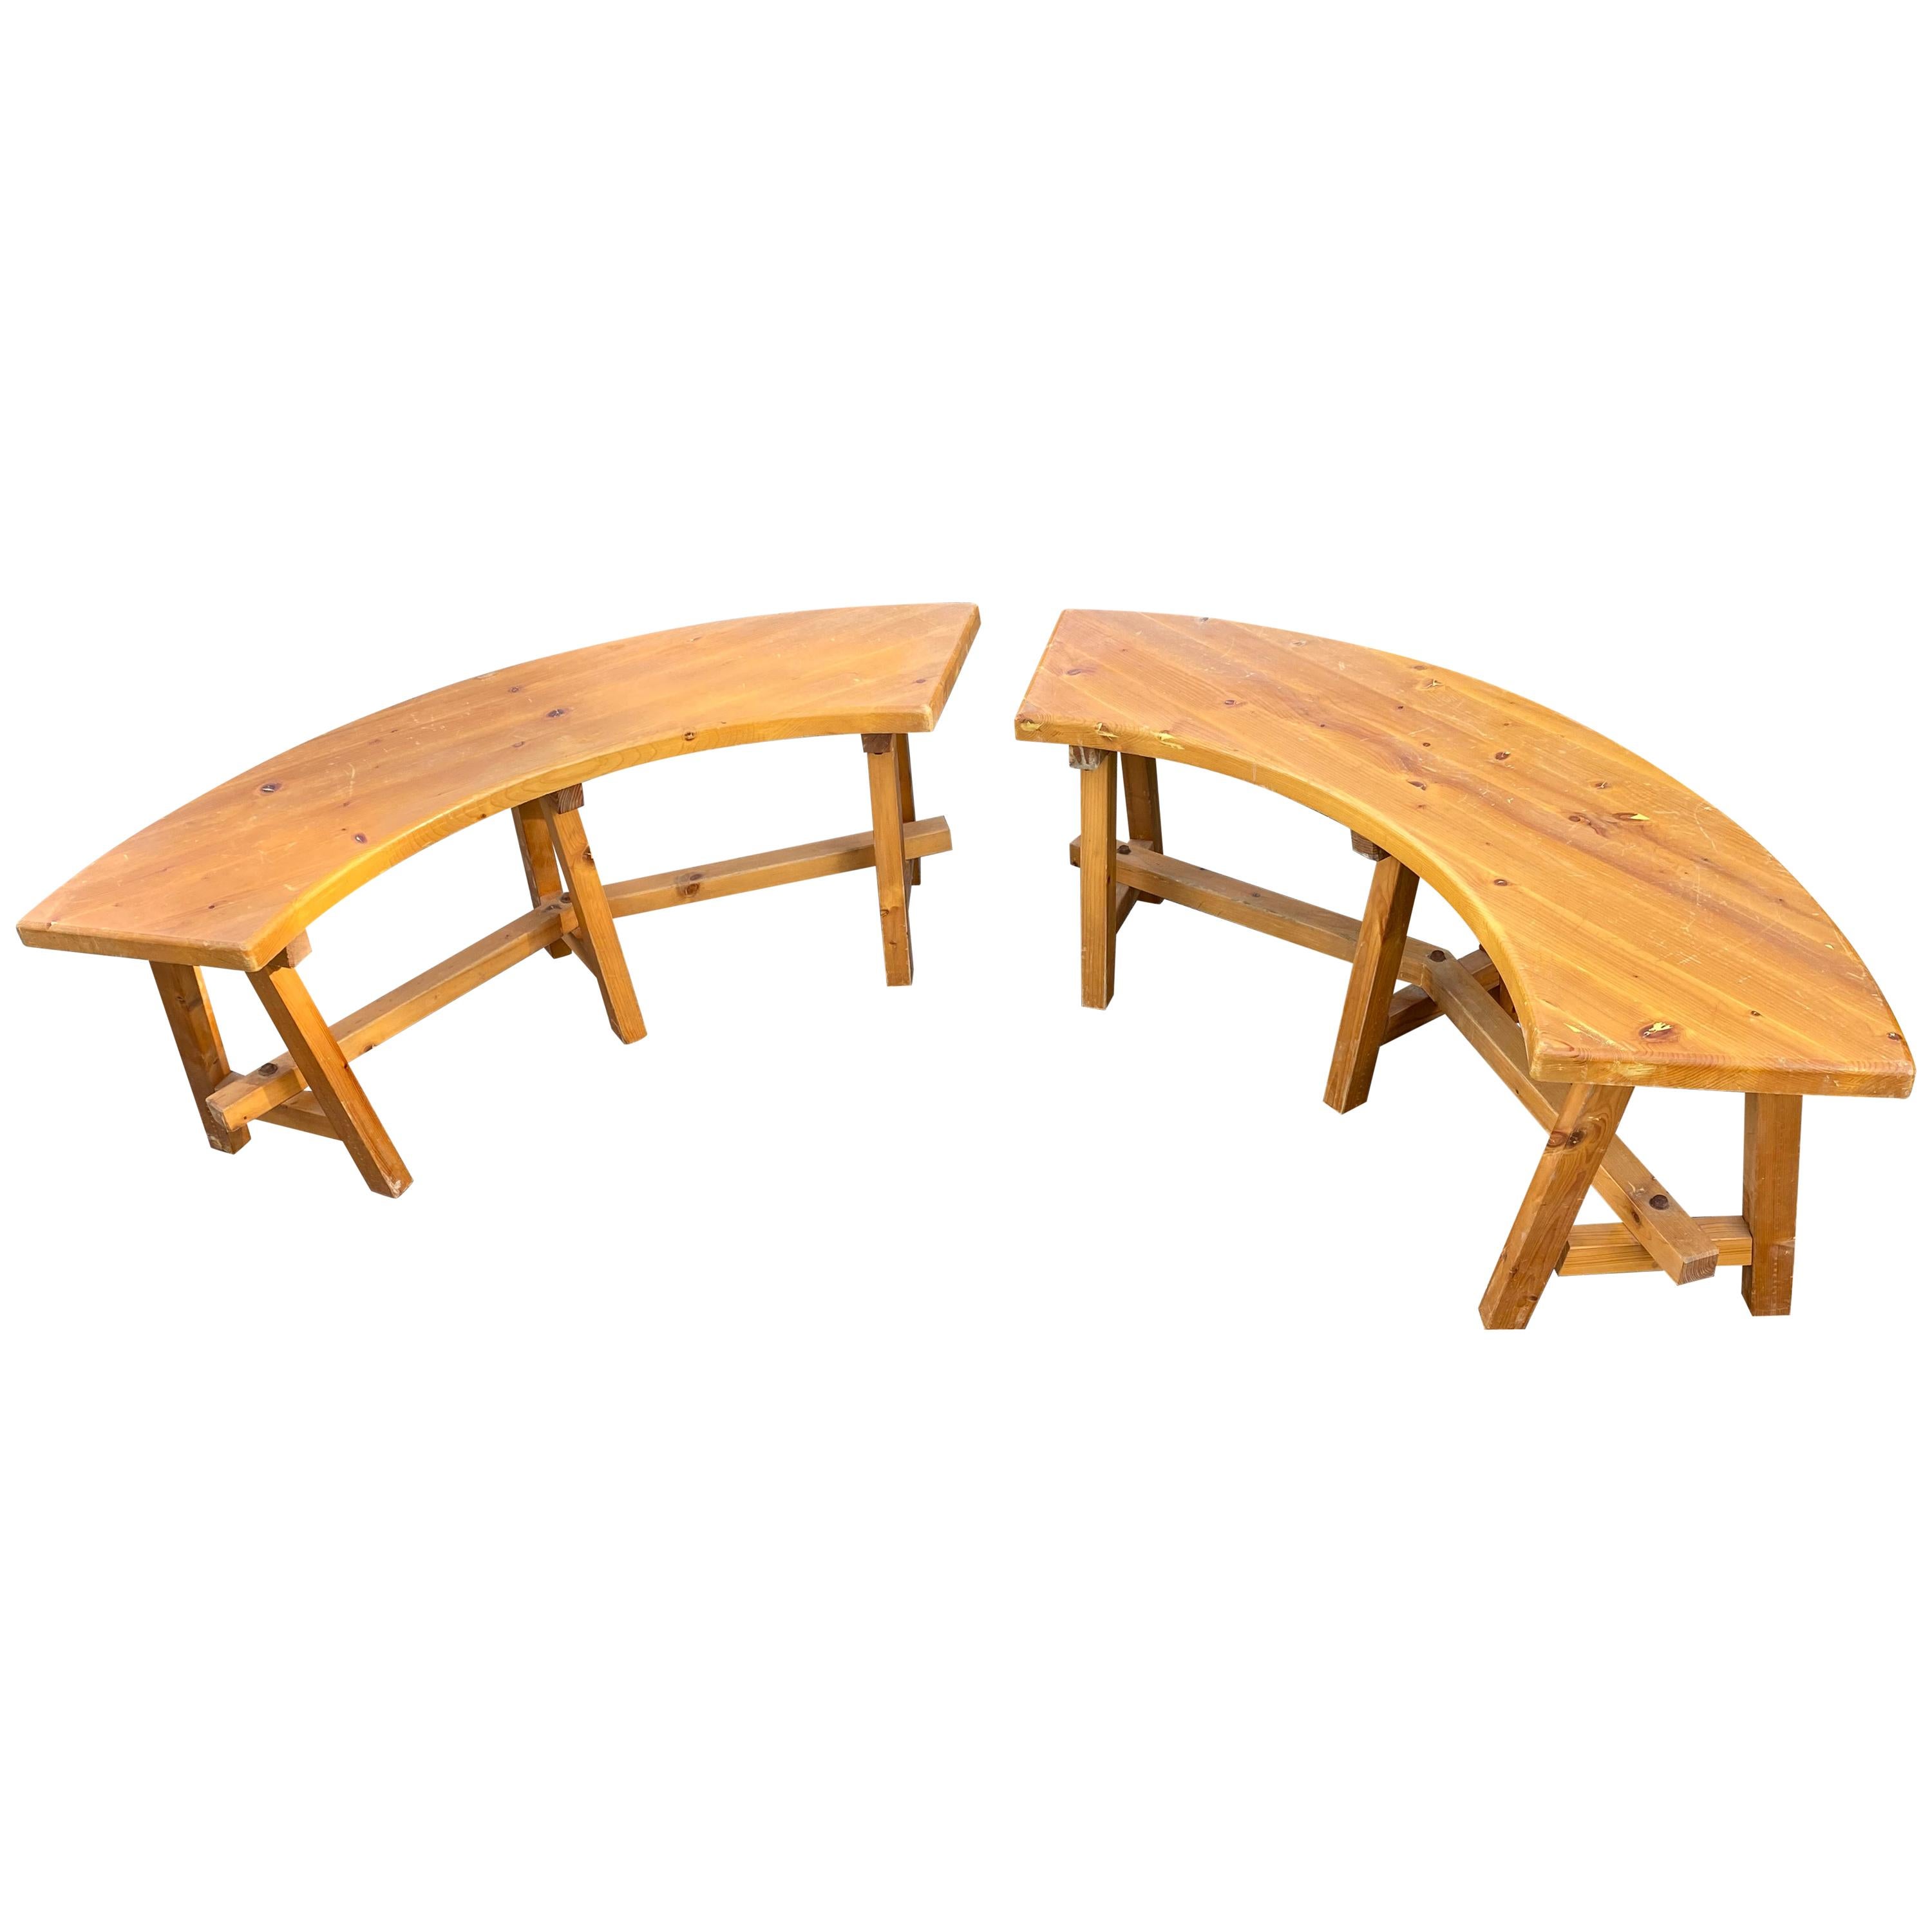 2 Pine Benches in the Style of Chapo, circa 1970 For Sale